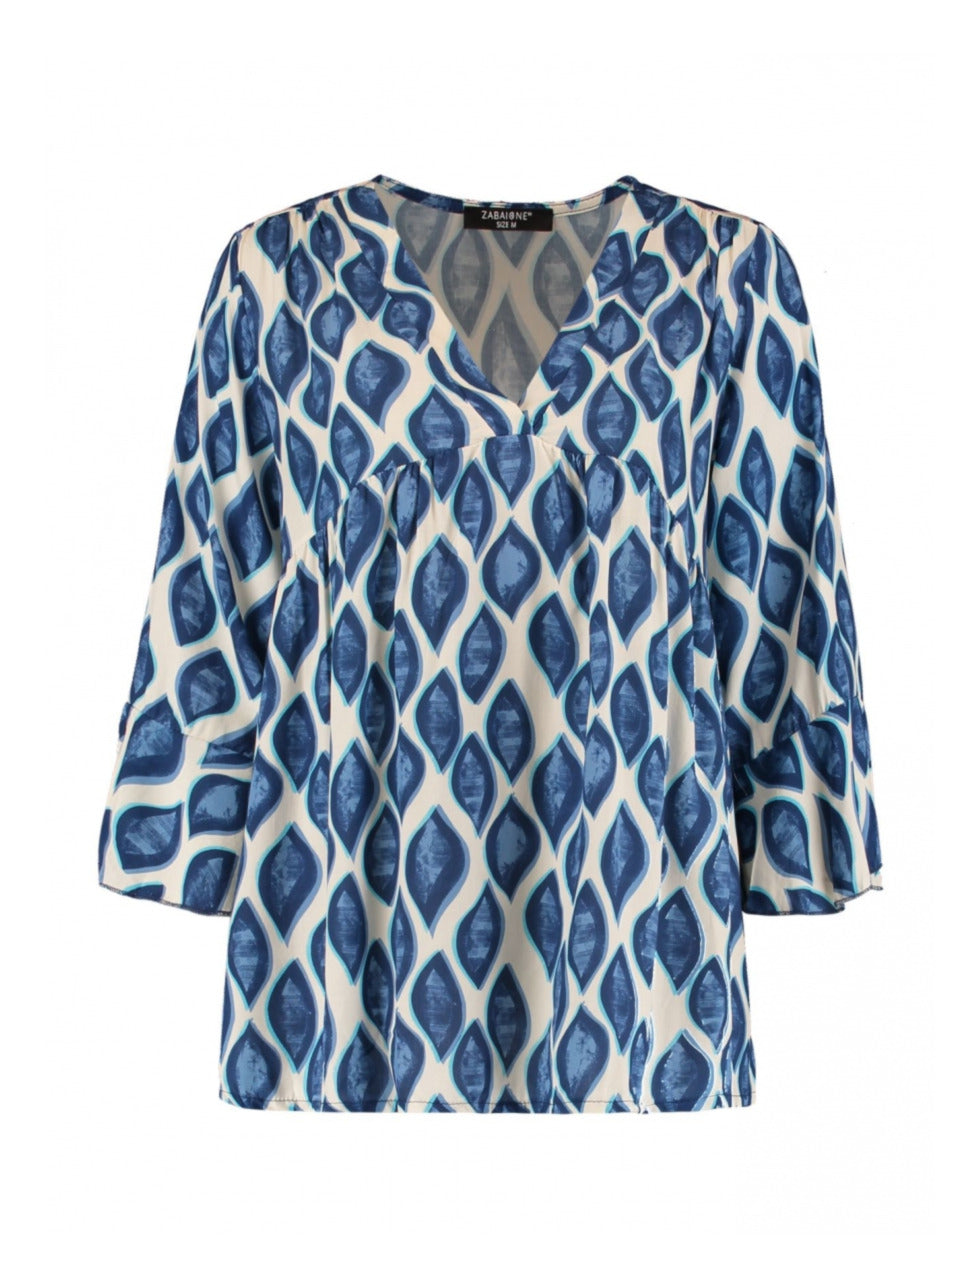 Ria Navy Patterned Blouse